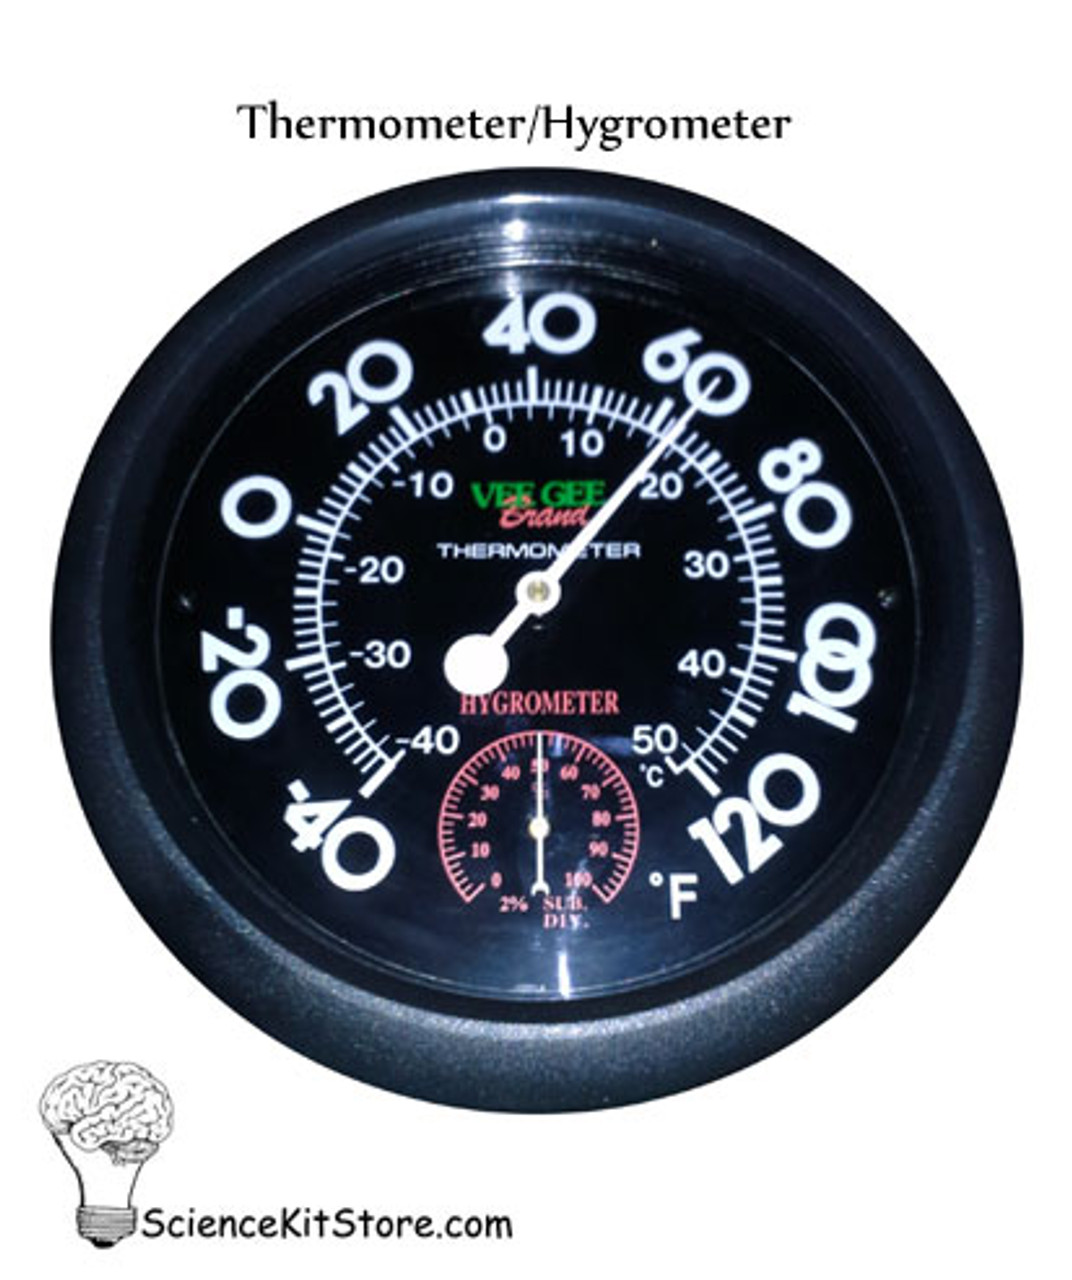 DH500 – Hygro-Thermometer - Pacer Instruments